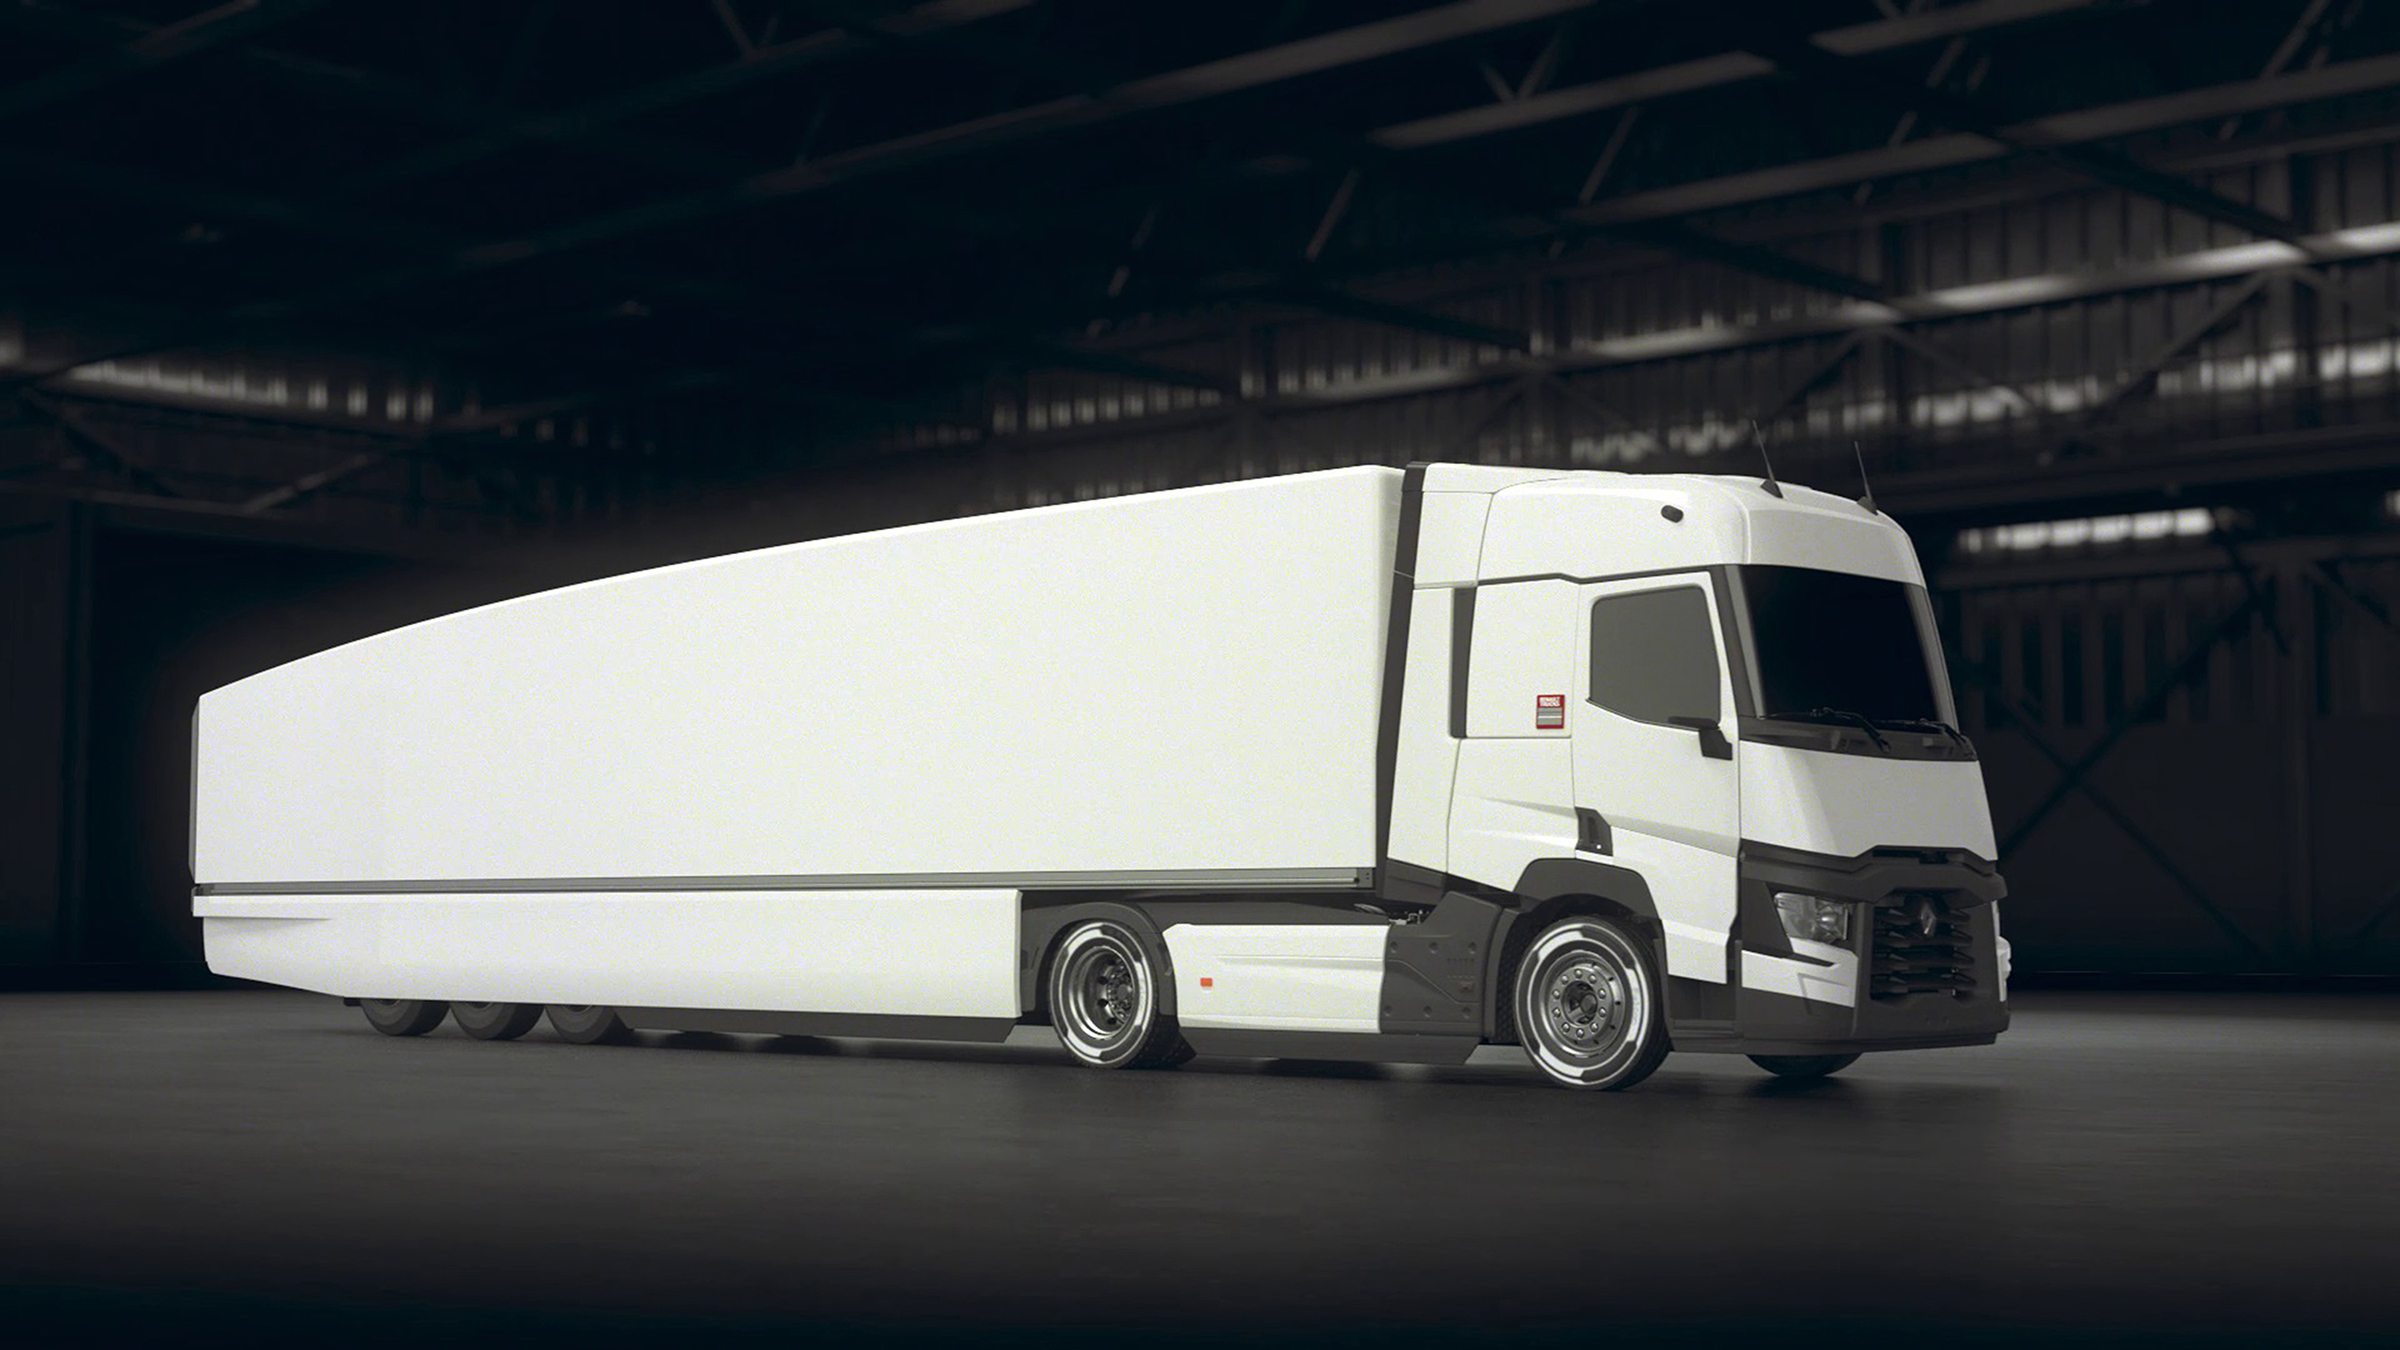 RENAULT TRUCKS OPTIFUEL LAB 3 AIMS TO REDUCE FUEL CONSUMPTION BY 13 percent